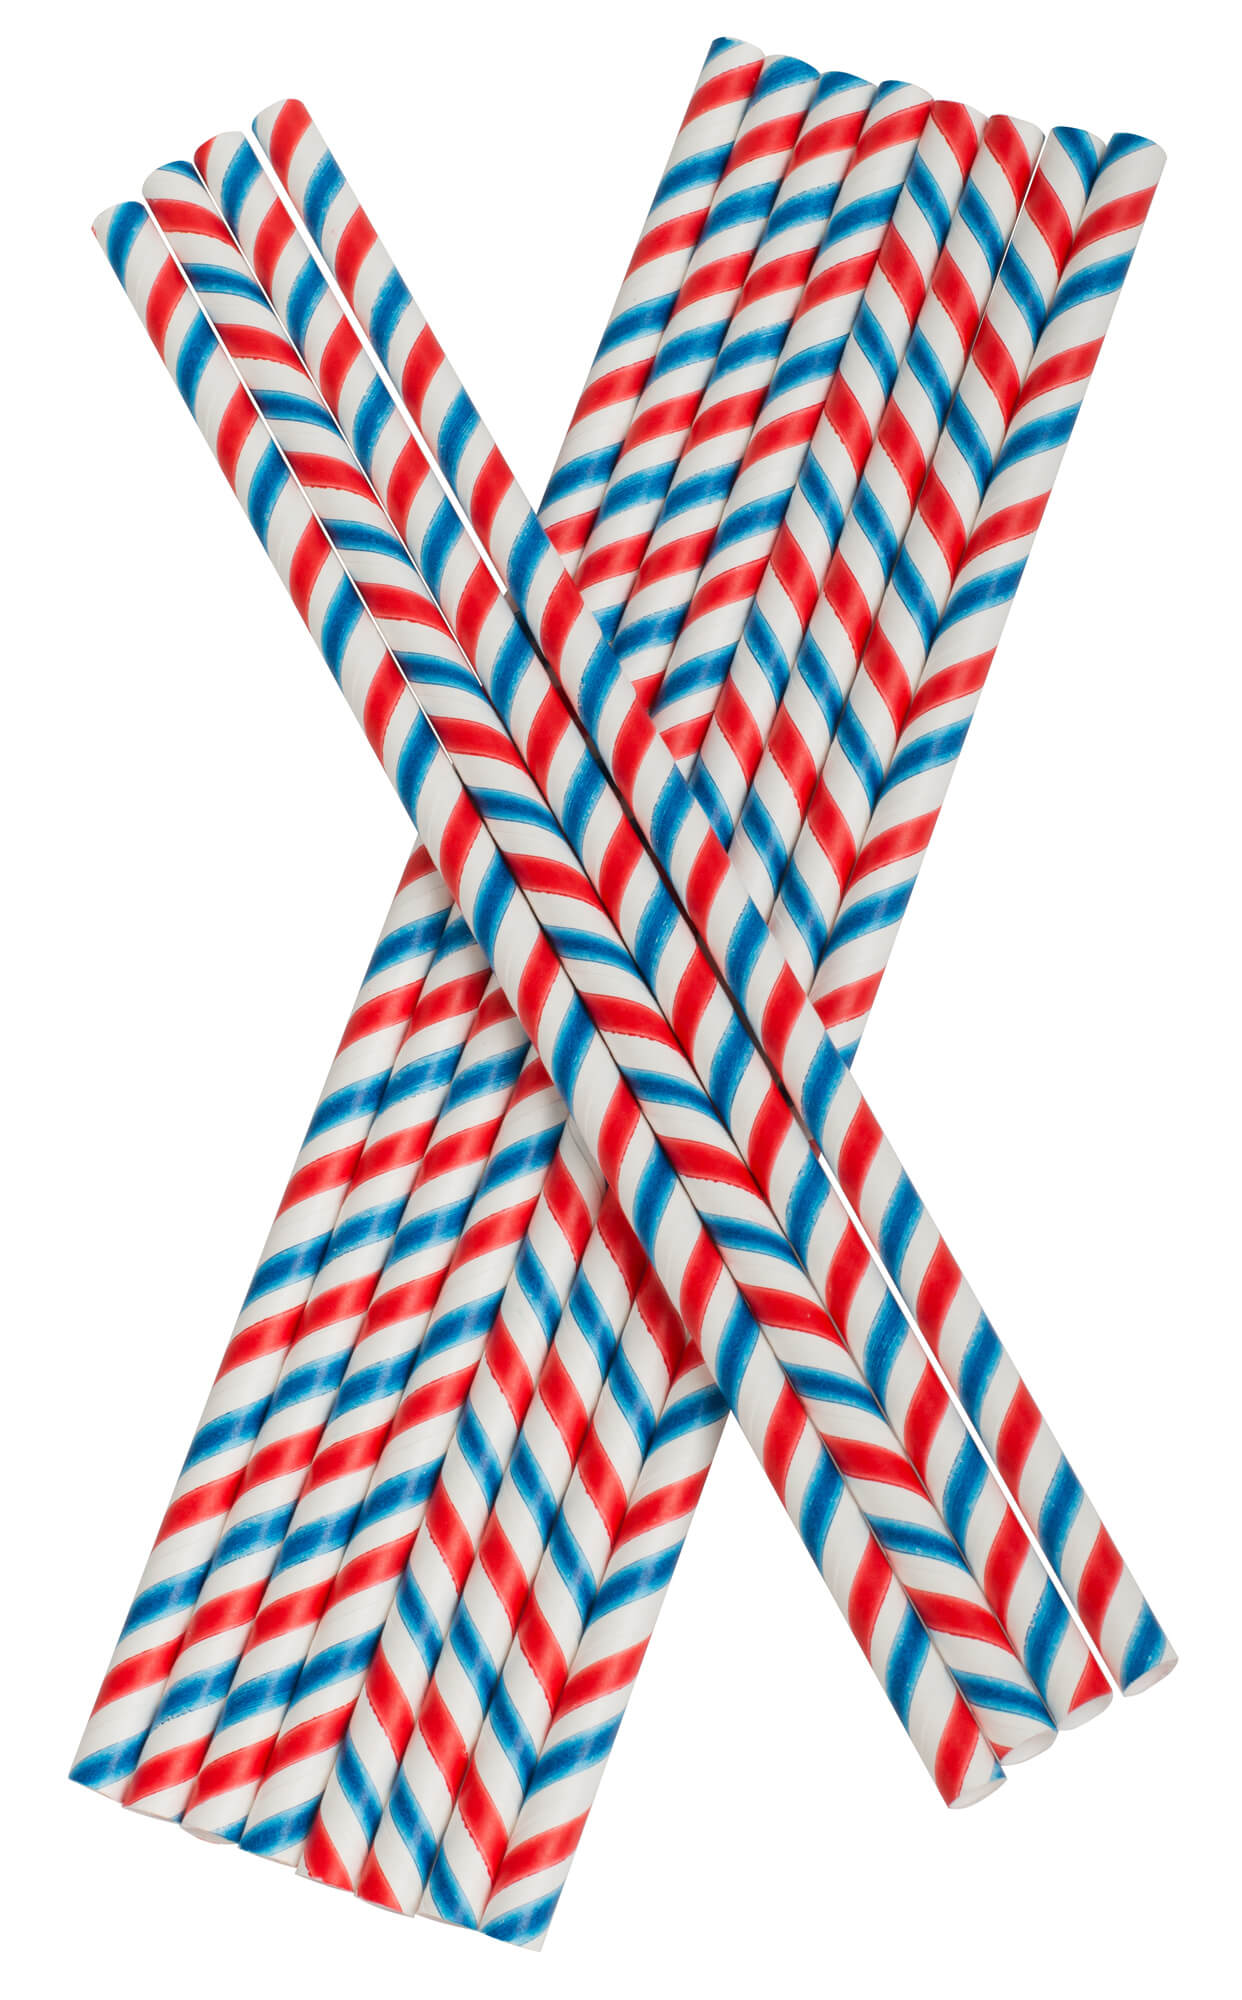 Drinking Straws, Paper (8x255mm) - red white blue striped